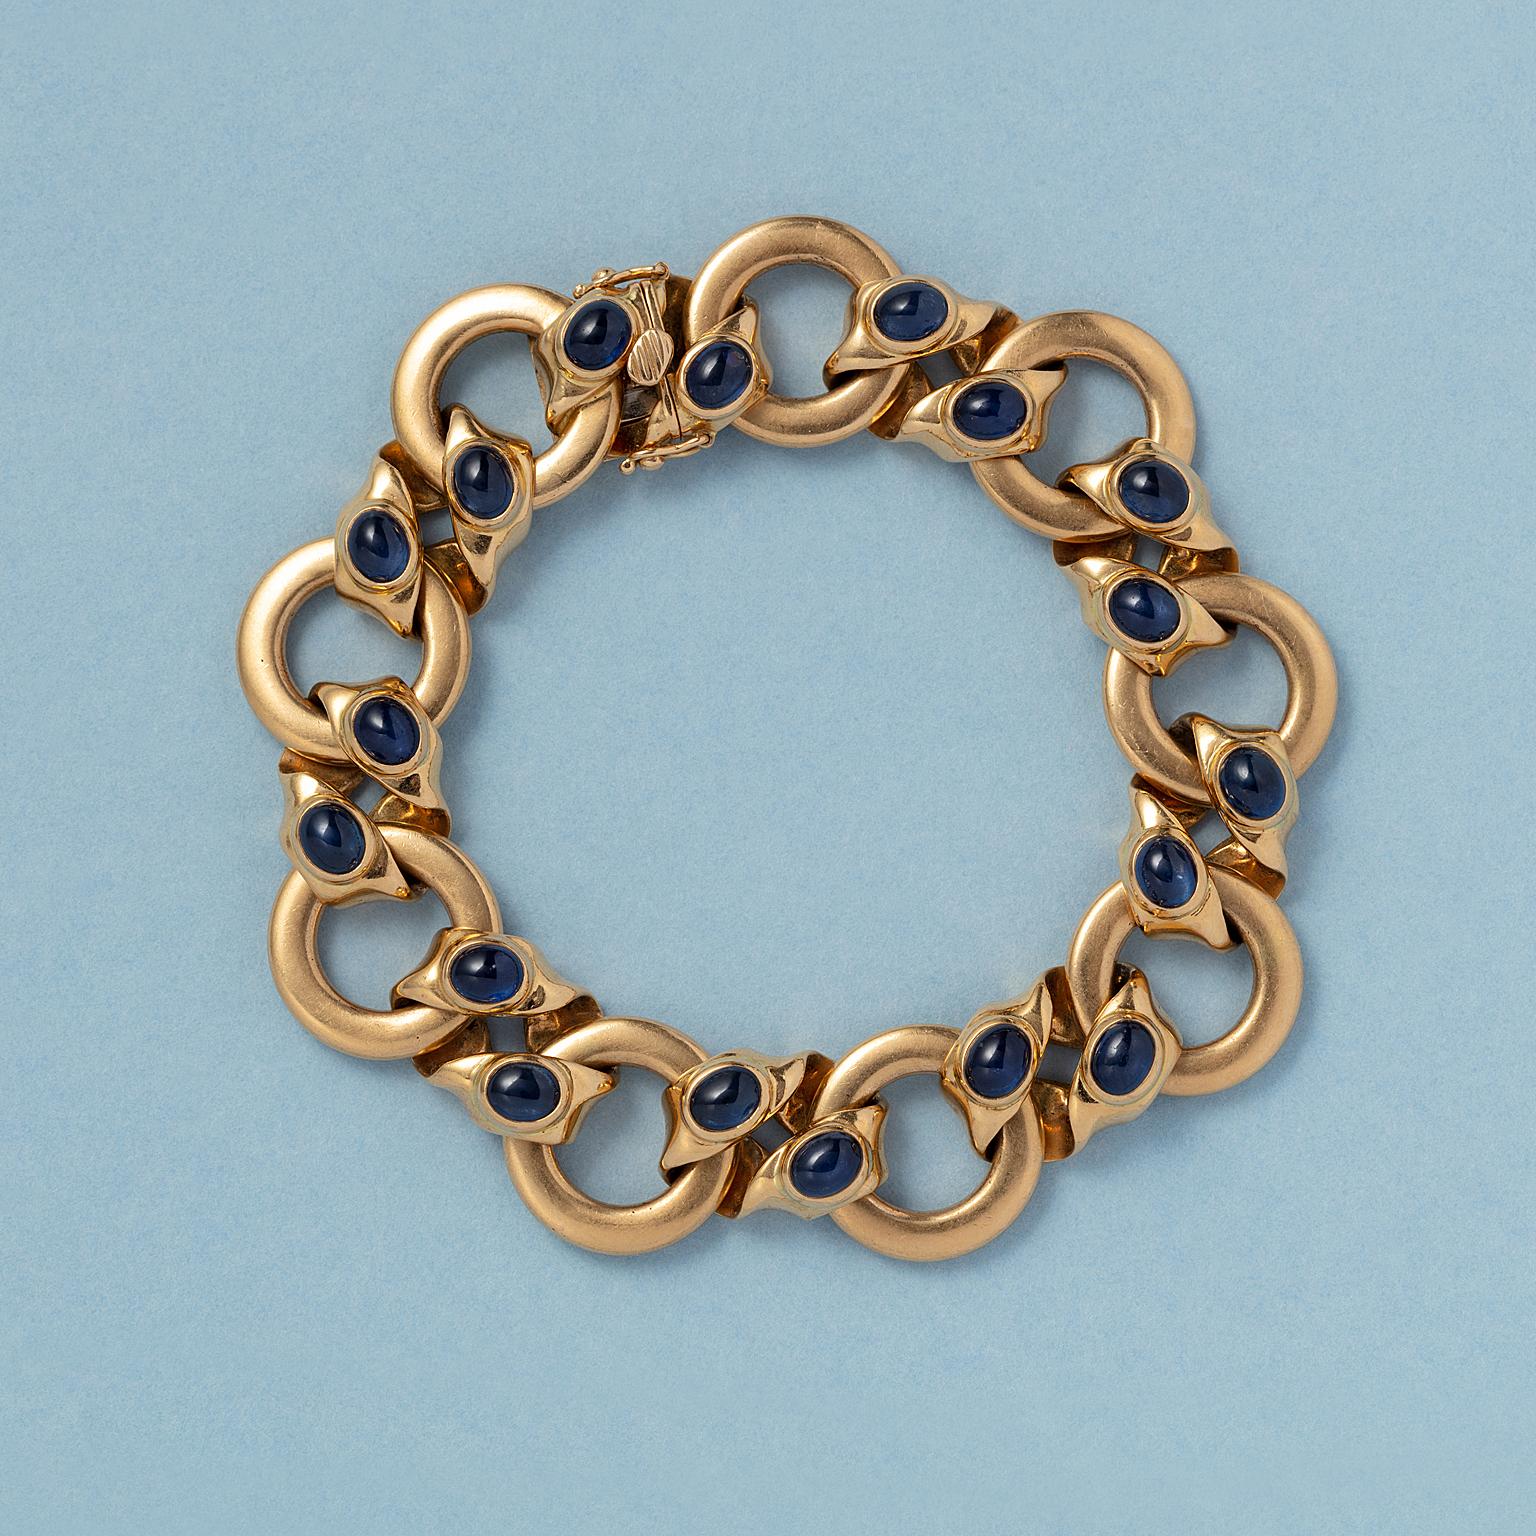 A hand made 18 carat gold bracelet with round links and connecting links that each have two oval cabochon cut sapphires (each app. 0.6 carat and app. 5.4 carat) with a hidden lock and a German master mark ETH.

weight: 71.18 grams
length: 18.5 cm